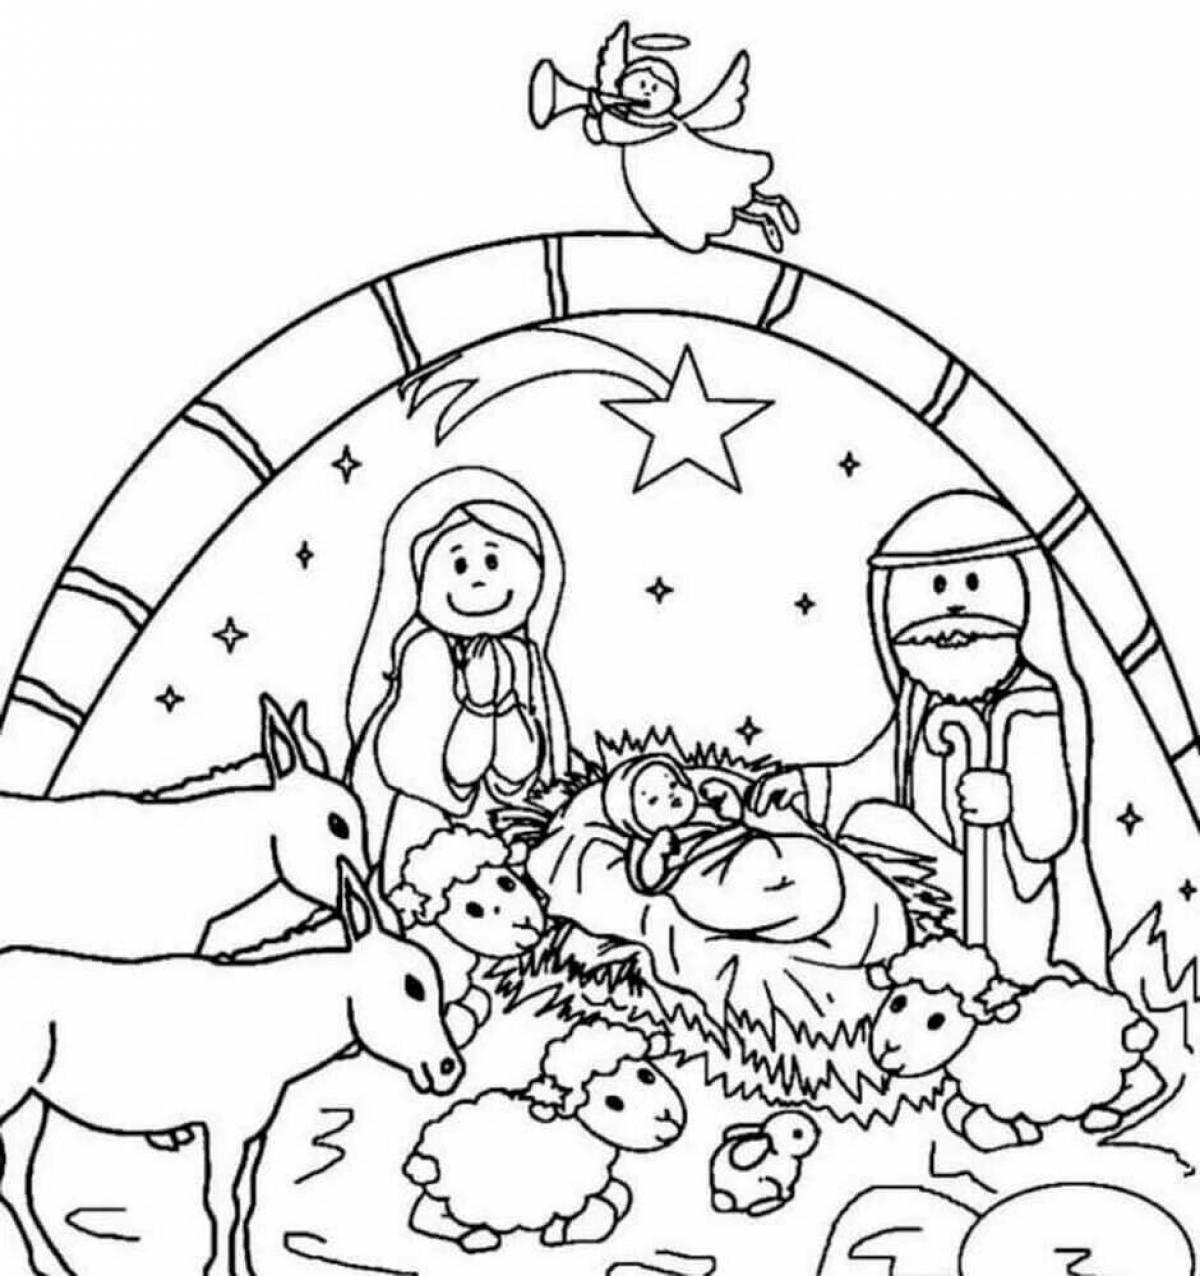 Charming Christmas coloring book for 5-6 year olds